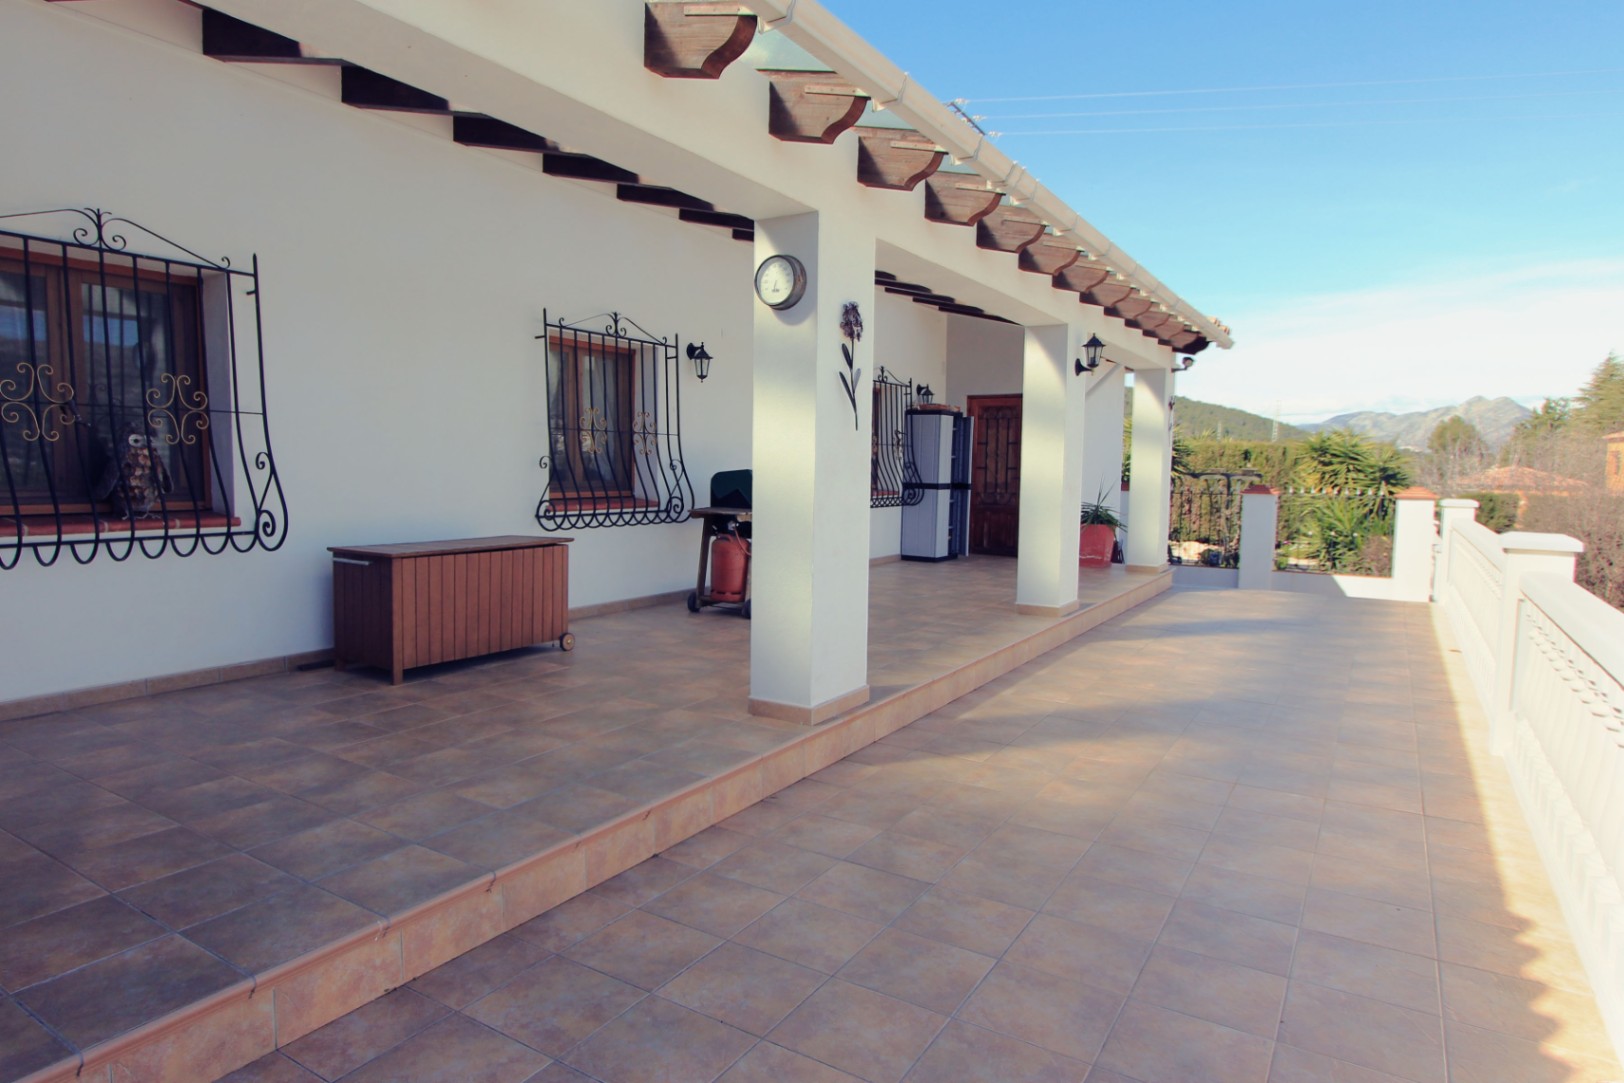 Detached finca, on a flat plot, located just on the outskirts of Jalon